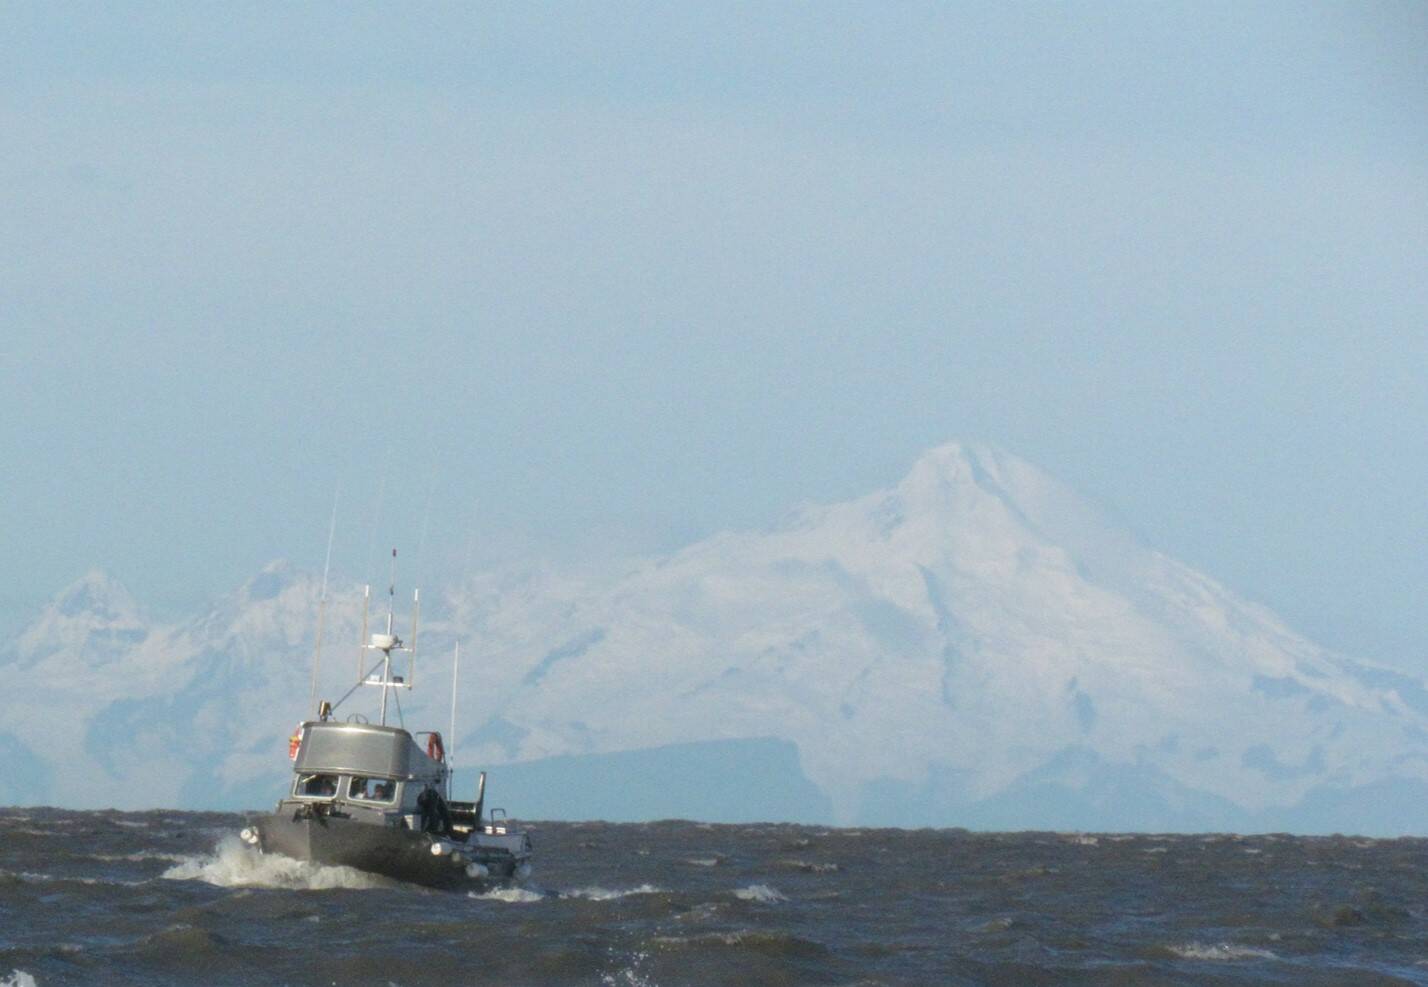 A commercial drift boat running in Cook Inlet on an unknown date. Courtesty of Upper Cook Inlet Drift Association (UCIDA).